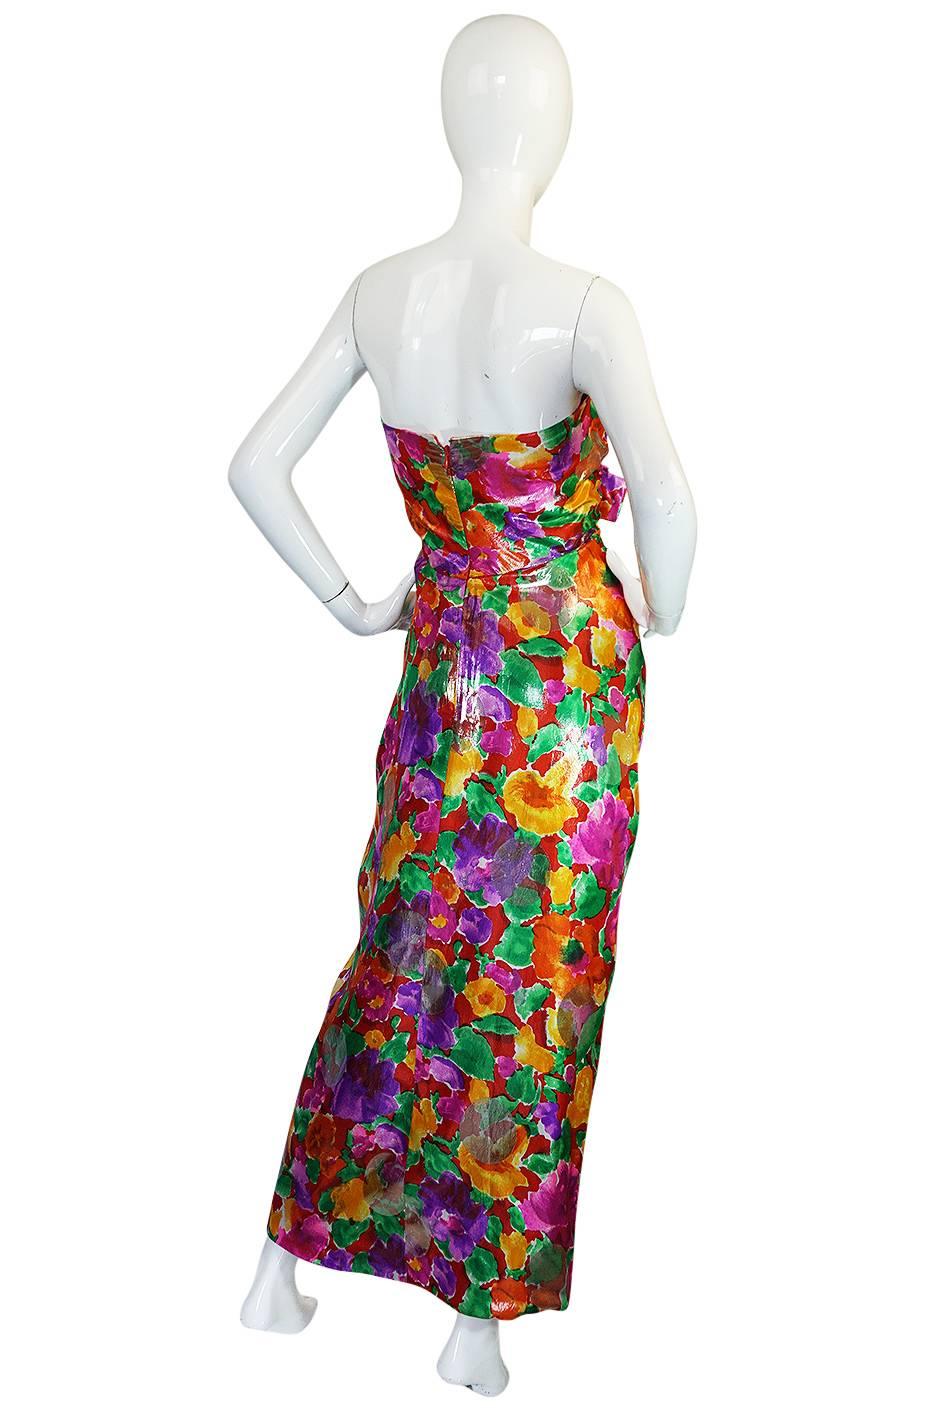 This beautiful Scaasi Boutique dress is made from a brilliantly colored metallic lame fabric that has a gorgeous abstract floral design strewn across its surface. The entire fabric has been given a metallic sheen and then there are gold circles